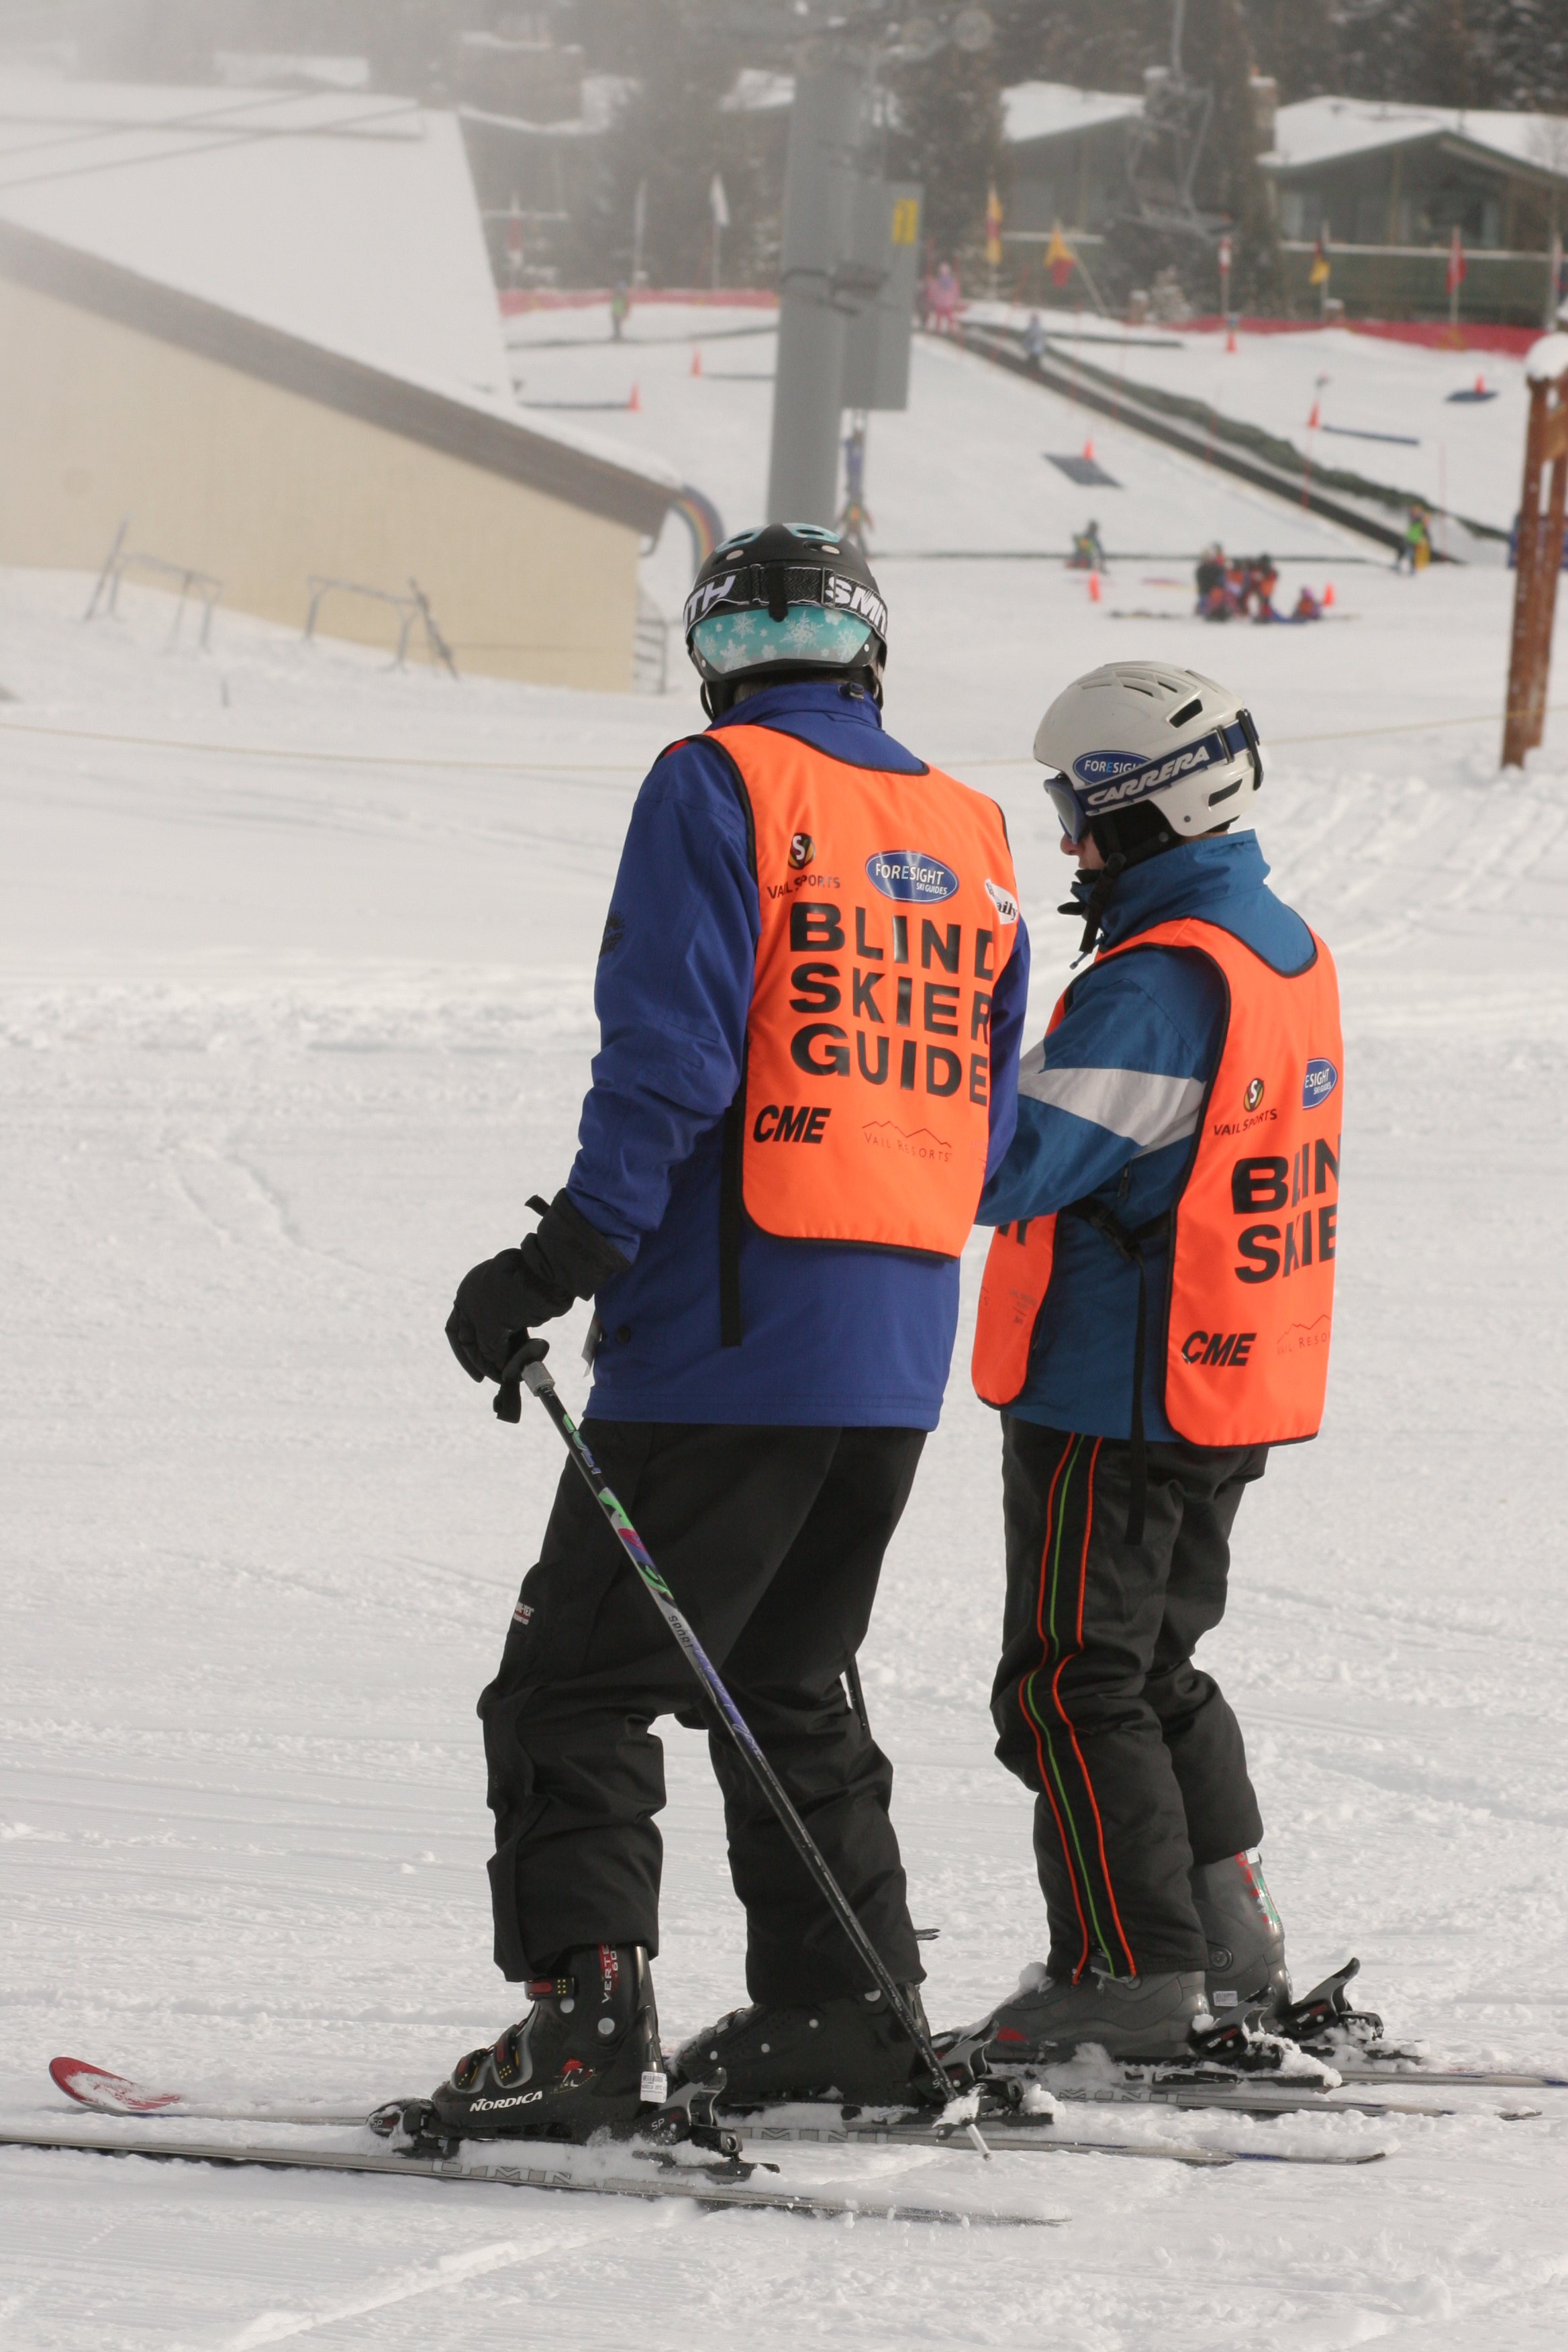 The Daniels Fund grant will also aid Foresight in recruiting more volunteers to work as guides. (photo by Foresight Ski Guides)